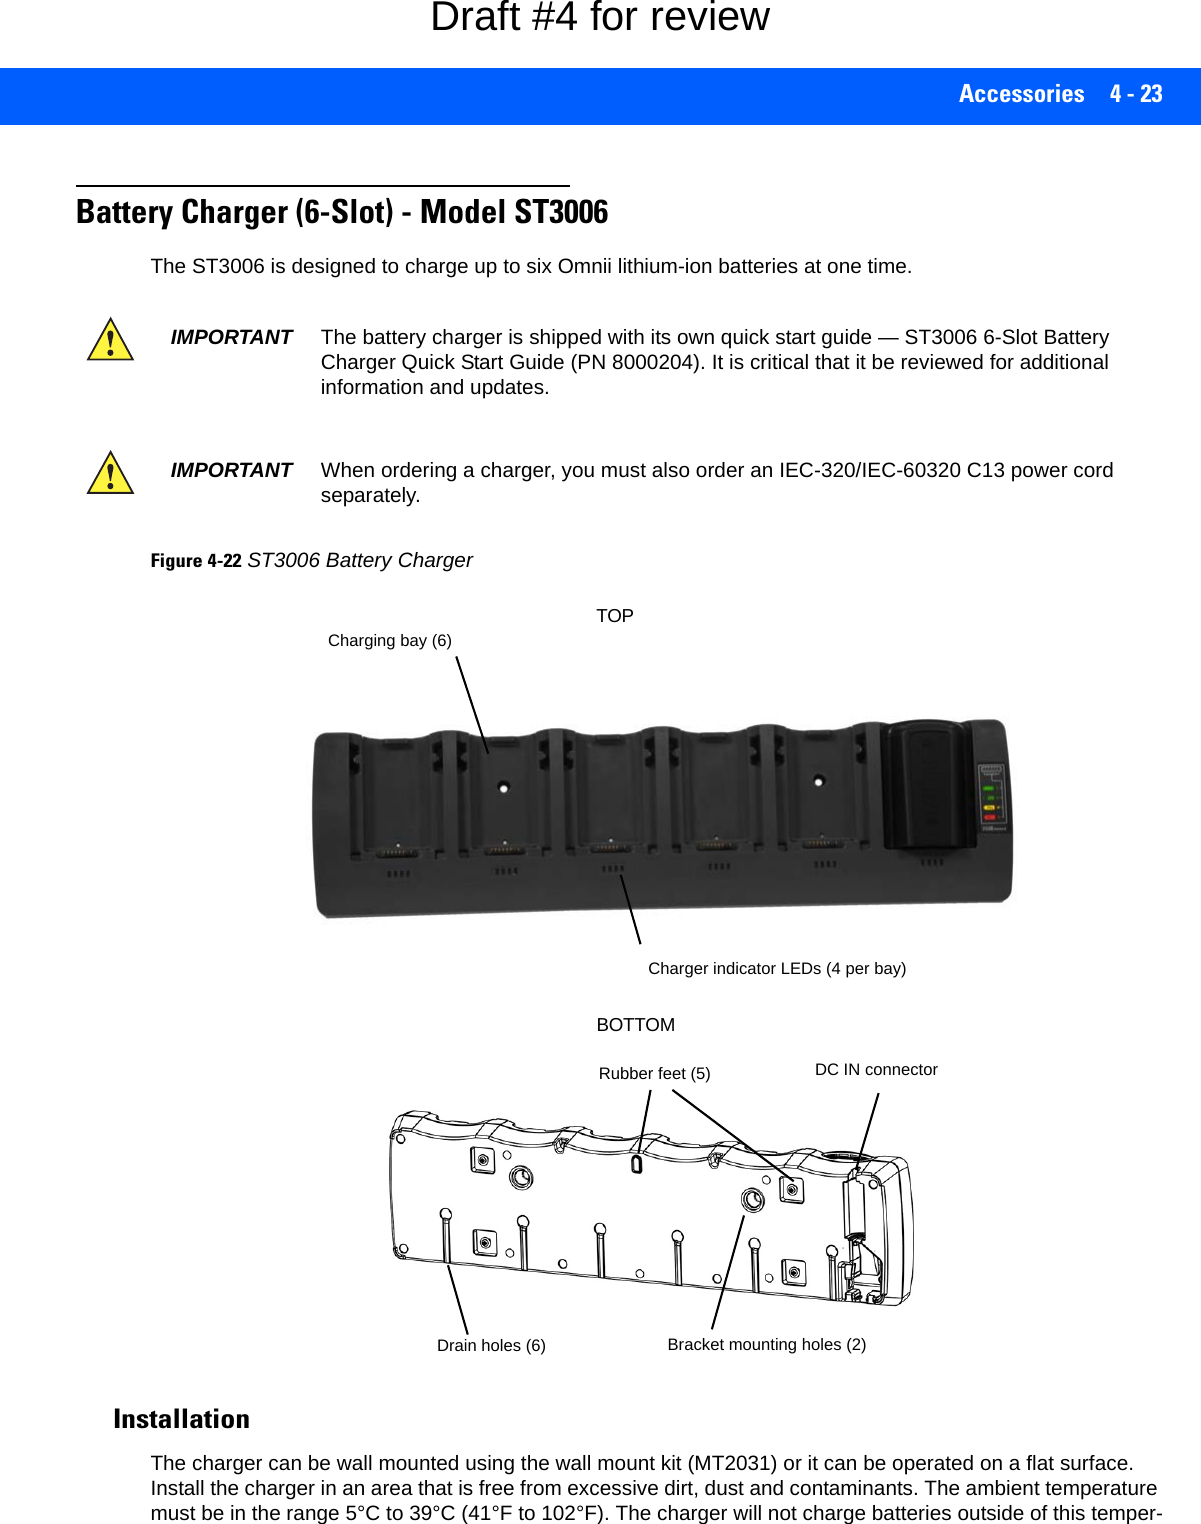 Accessories 4 - 23Battery Charger (6-Slot) - Model ST3006The ST3006 is designed to charge up to six Omnii lithium-ion batteries at one time. Figure 4-22ST3006 Battery ChargerInstallationThe charger can be wall mounted using the wall mount kit (MT2031) or it can be operated on a flat surface. Install the charger in an area that is free from excessive dirt, dust and contaminants. The ambient temperature must be in the range 5°C to 39°C (41°F to 102°F). The charger will not charge batteries outside of this temper-IMPORTANT The battery charger is shipped with its own quick start guide — ST3006 6-Slot Battery Charger Quick Start Guide (PN 8000204). It is critical that it be reviewed for additional information and updates.IMPORTANT When ordering a charger, you must also order an IEC-320/IEC-60320 C13 power cord separately.DC IN connectorRubber feet (5)Charging bay (6)TOPBOTTOMDrain holes (6) Bracket mounting holes (2)Charger indicator LEDs (4 per bay)Draft #4 for review